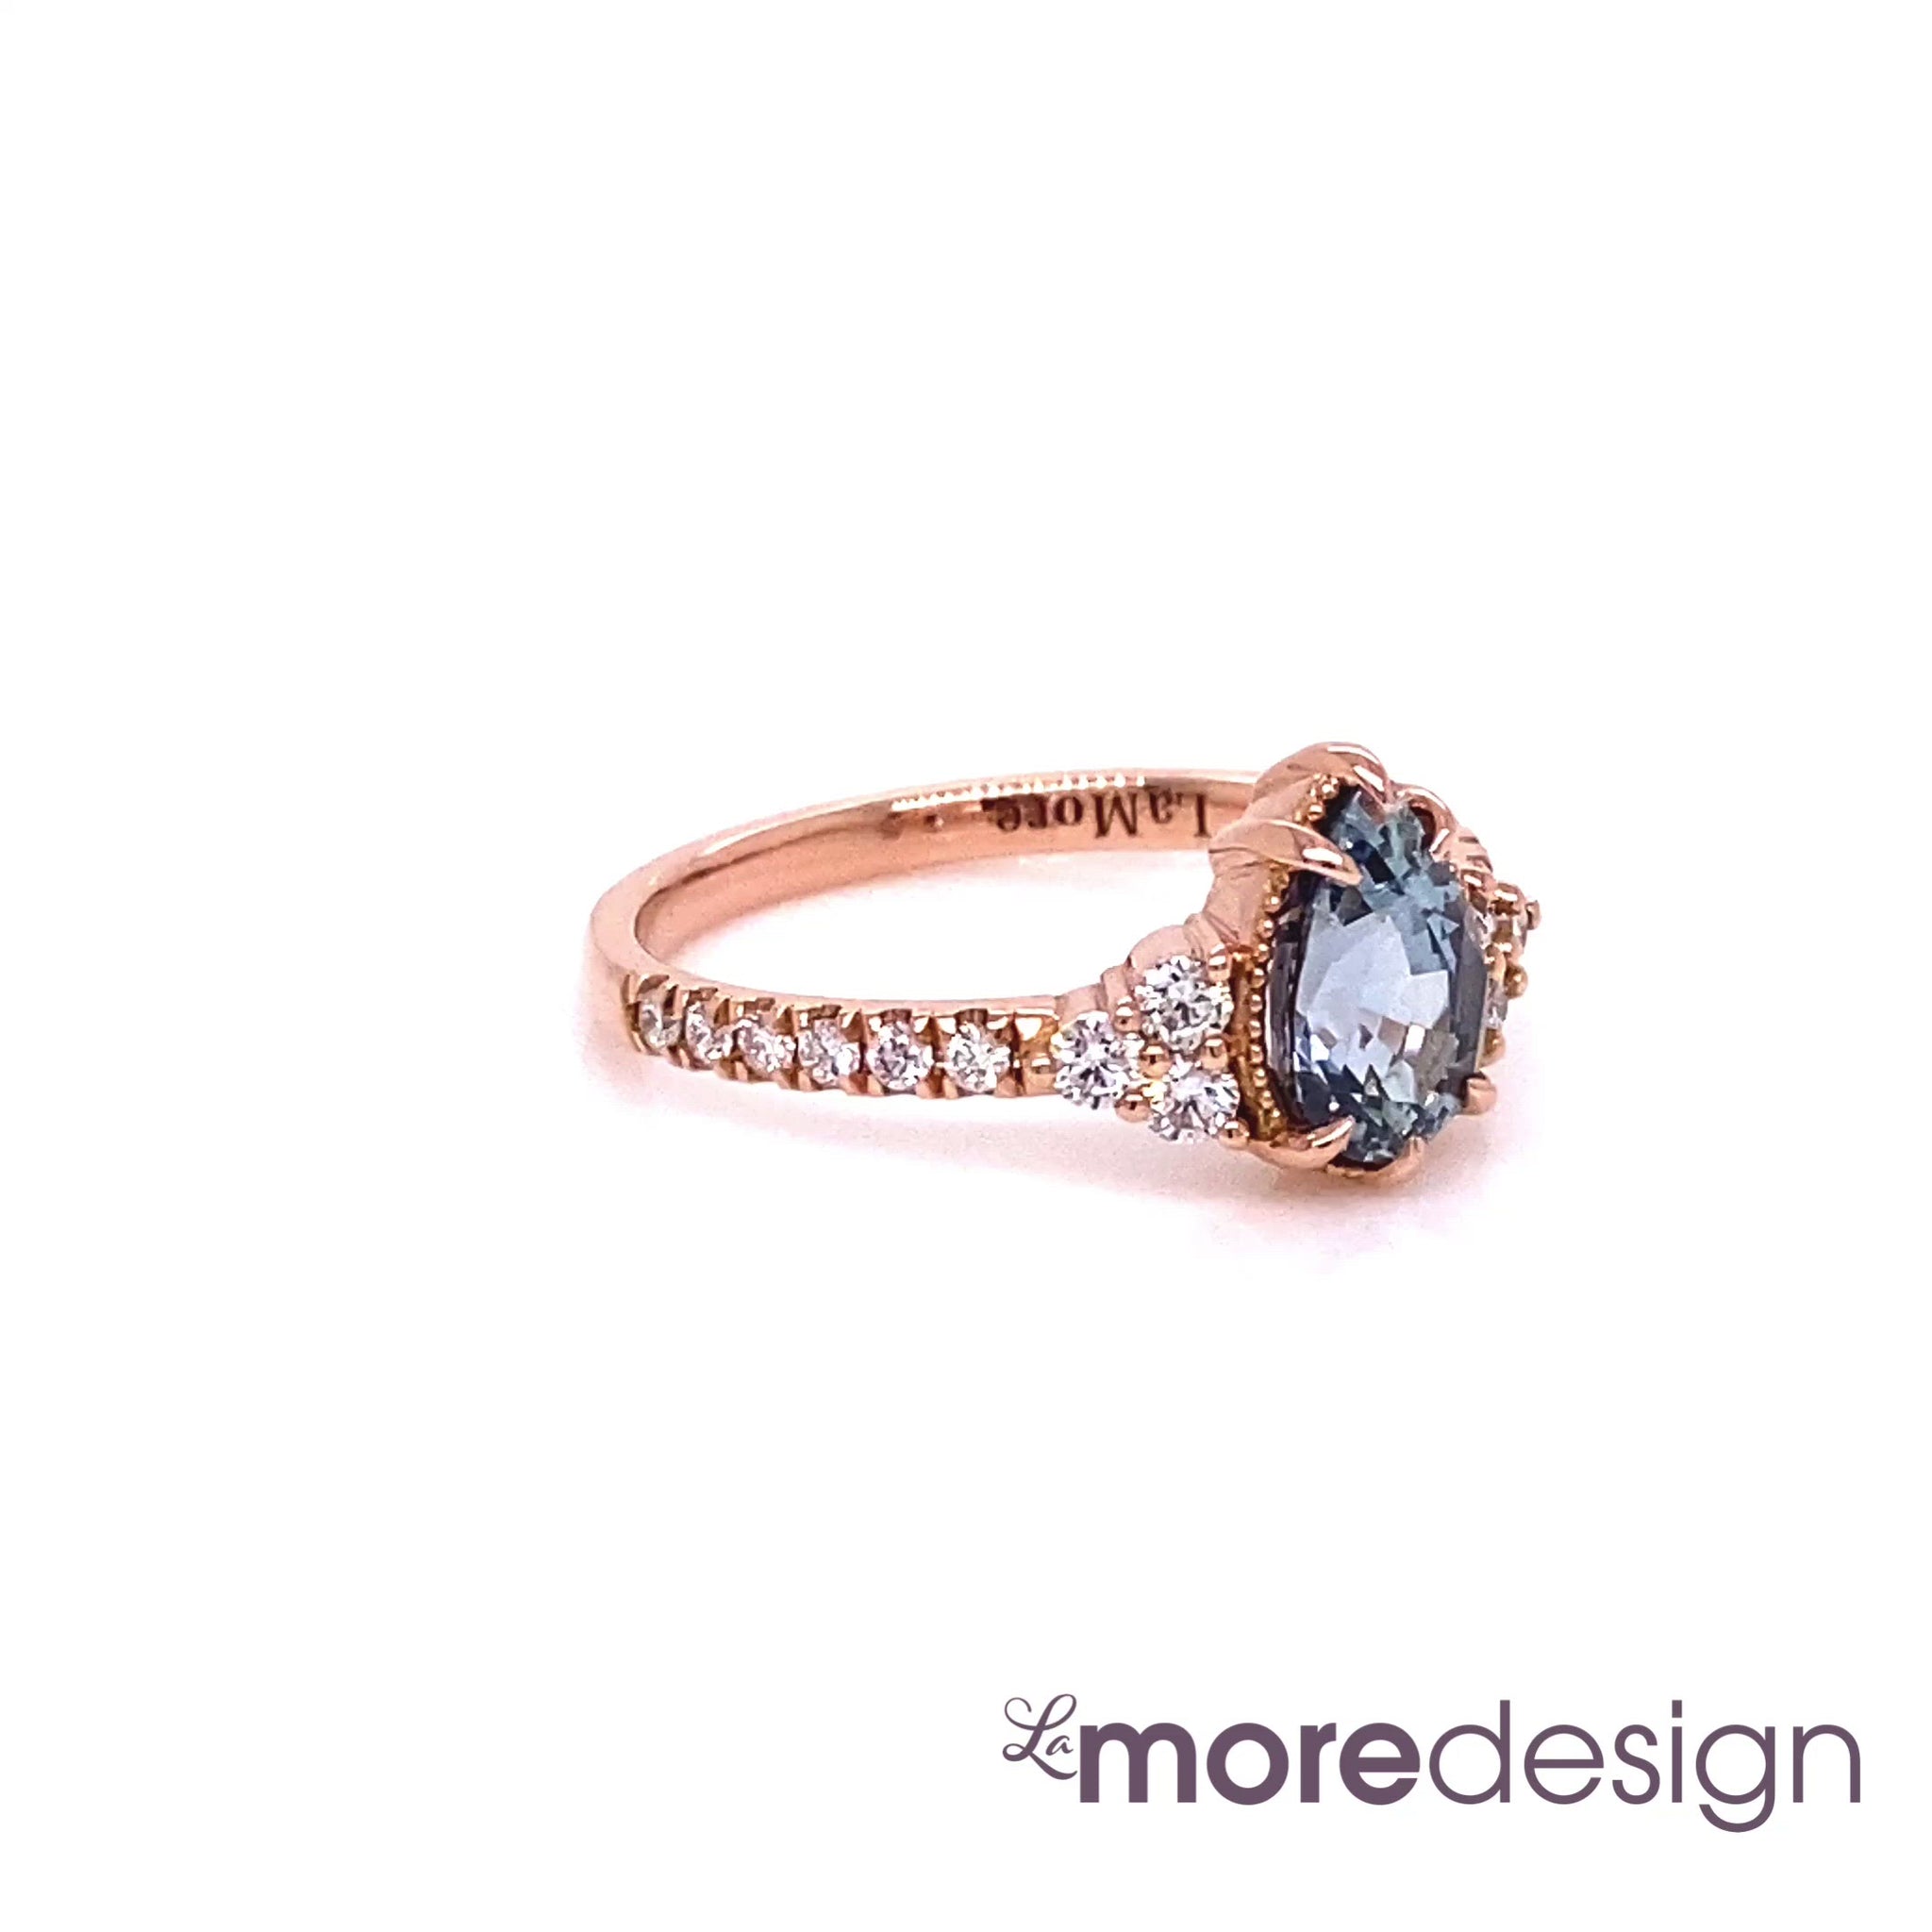 Gorgeous vintage-inspired 3 stone ring with a modern twist! This aqua blue sapphire diamond engagement ring in a 14k rose gold vintage style three stone ring setting features a 1.33 carats pear cut natural aqua blue sapphire center adorned with three brilliant-cut white diamonds on each side. To add extra sparkles to this already beautiful diamond ring, it is finished in a pave diamond band to complete the stunning look ~  the total gemstone and diamond weight of the whole ring is 1.67 carats.